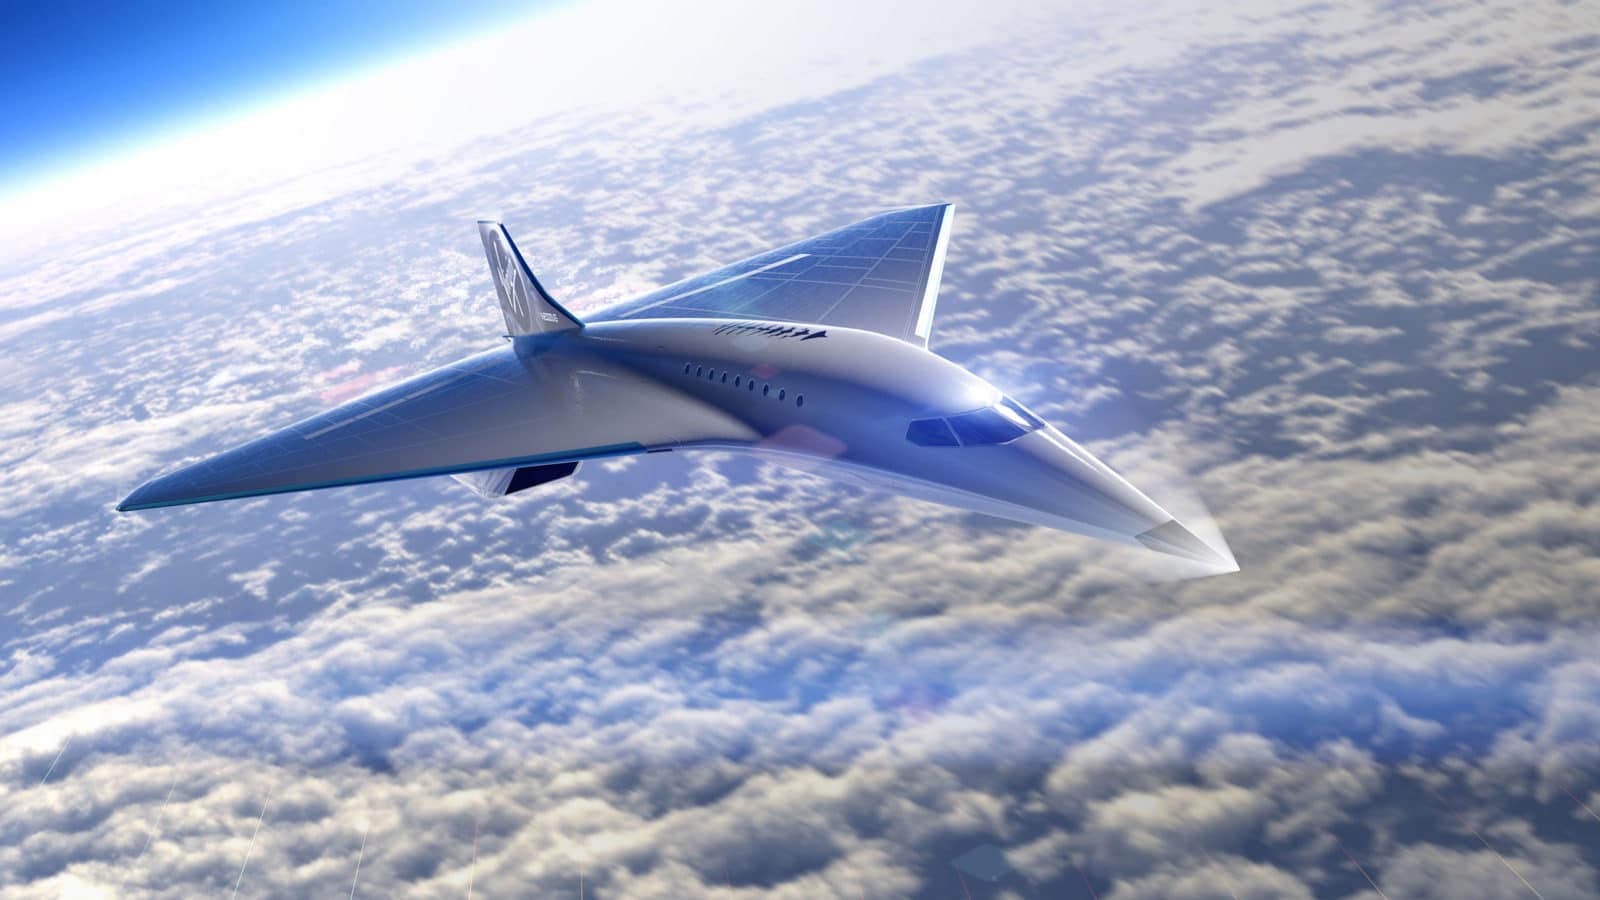 Virgin Galactic Holdings, Inc, a vertically integrated aerospace and space travel company, which includes its manufacturer of advanced air and space vehicles, The Spaceship Company (“TSC”), announced today the first stage design scope for the build of its high speed aircraft design, and the signing of a non-binding Memorandum of Understanding (MOU) with Rolls-Royce to collaborate in designing and developing engine propulsion technology for high speed commercial aircraft.